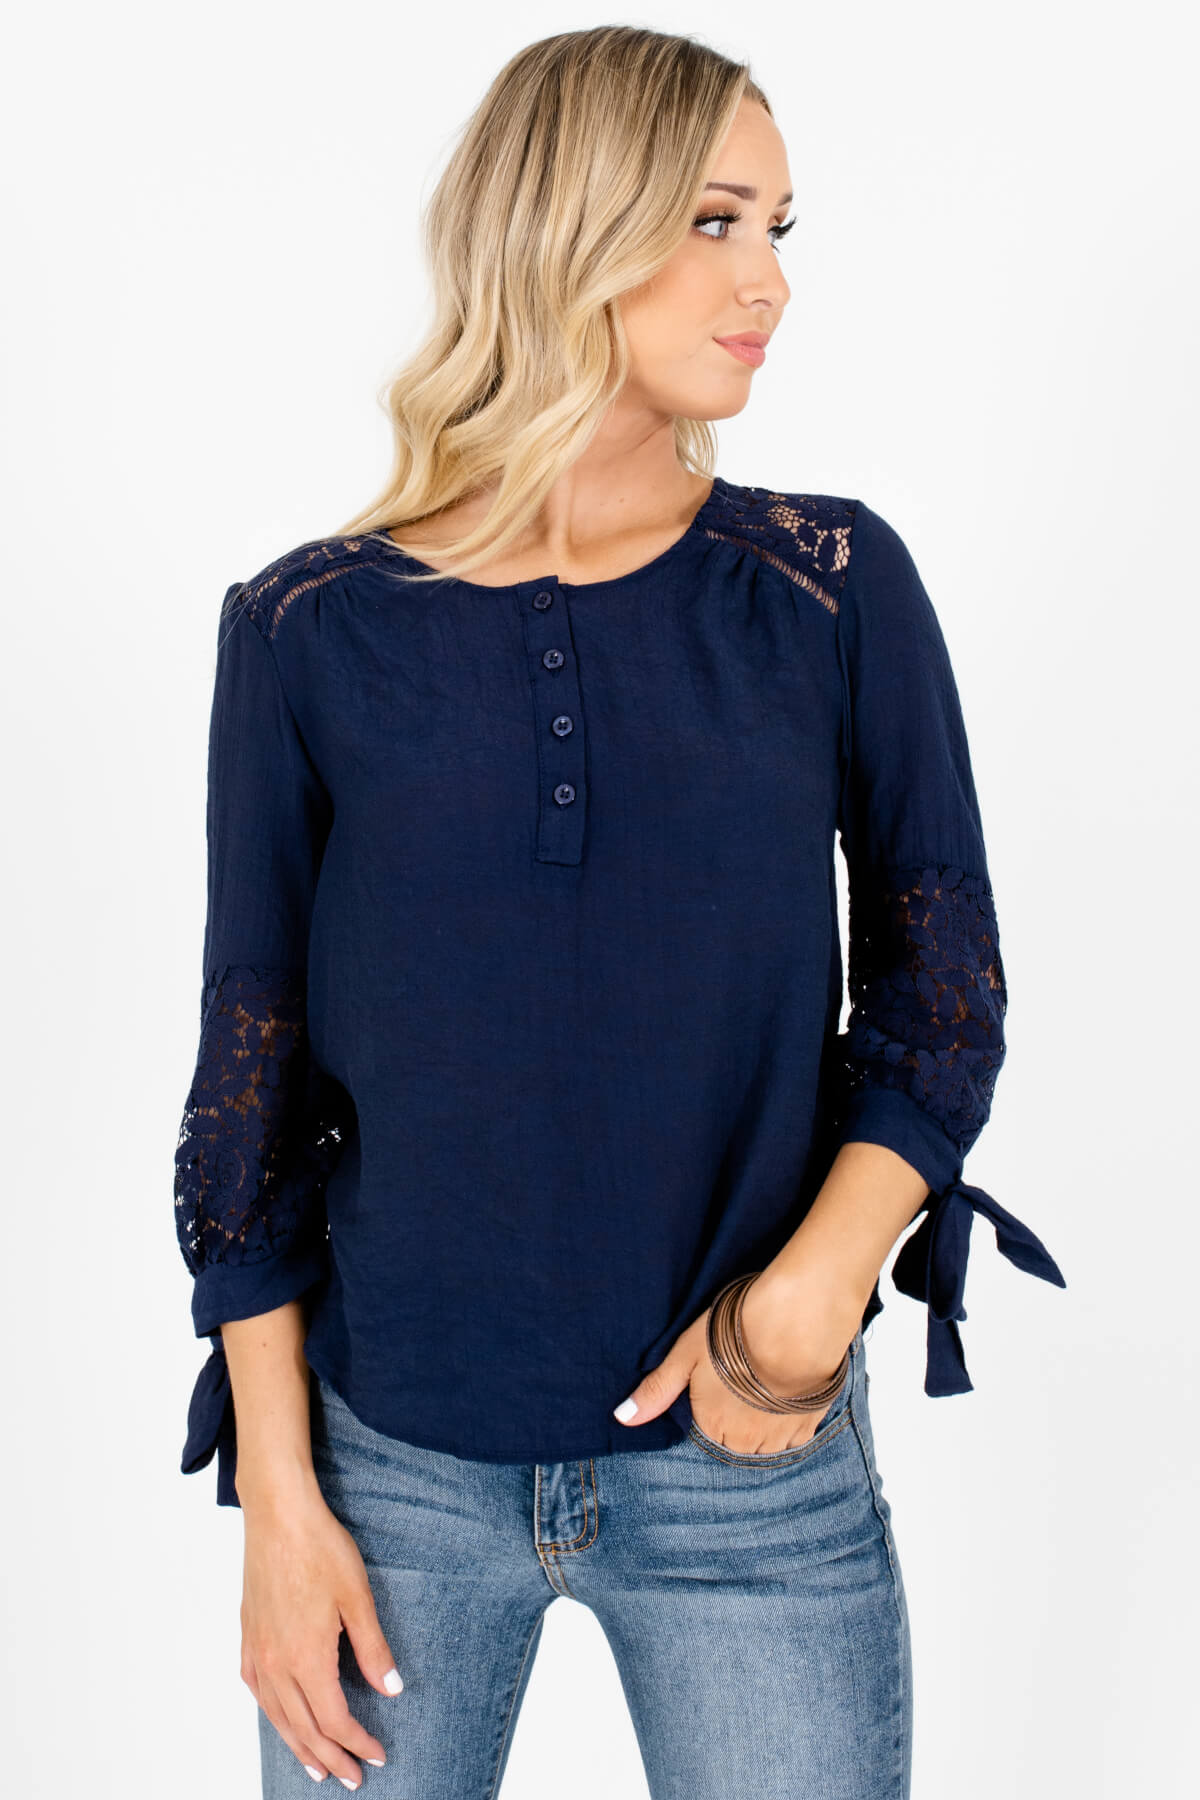 Navy Blue Crochet Lace 3/4 Sleeve Tops and Blouses for Women